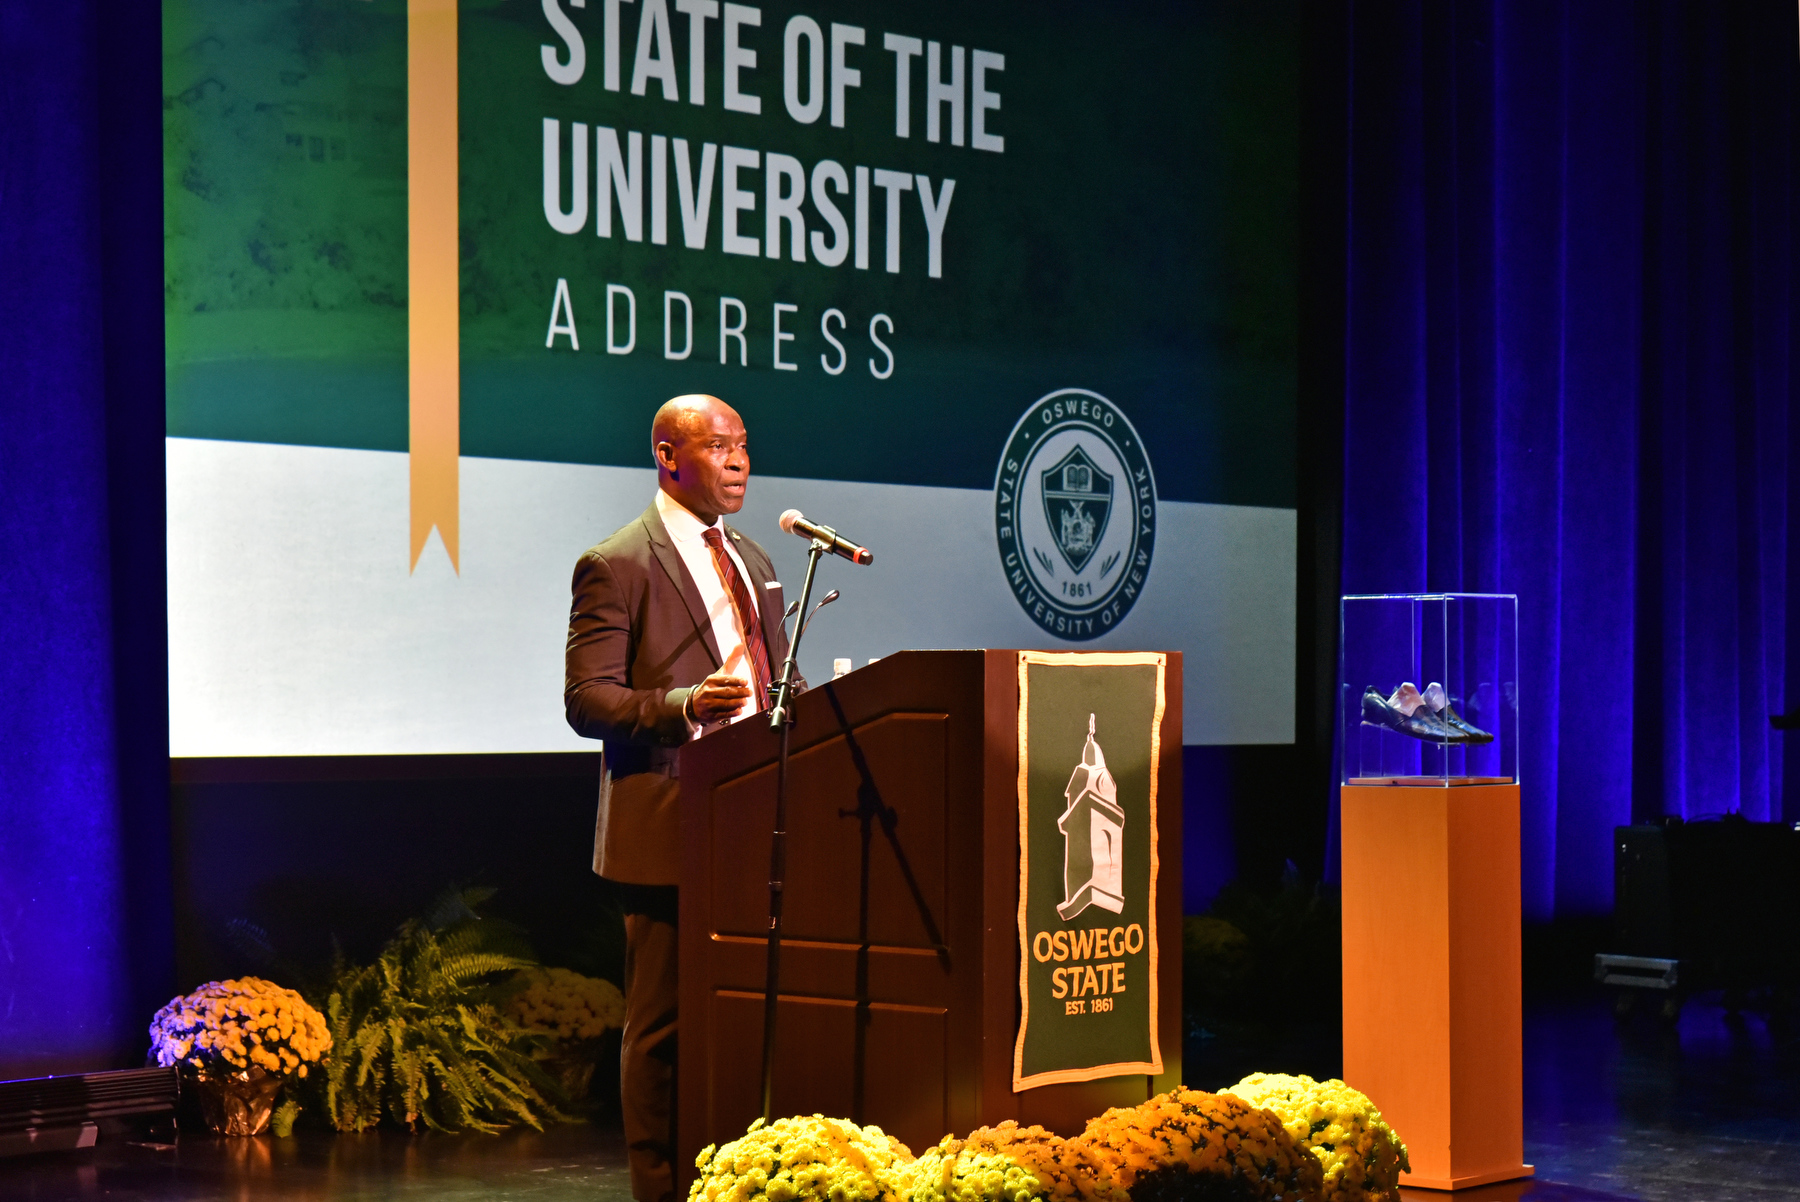 SUNY Oswego President Peter O. Nwosu delivered his inaugural State of the University Address, which laid out his Vision 4040 — a plan to double the number of graduates from 2,000 annually or 20,000 per decade to 4,000 annually and 40,000 per decade by 2040.